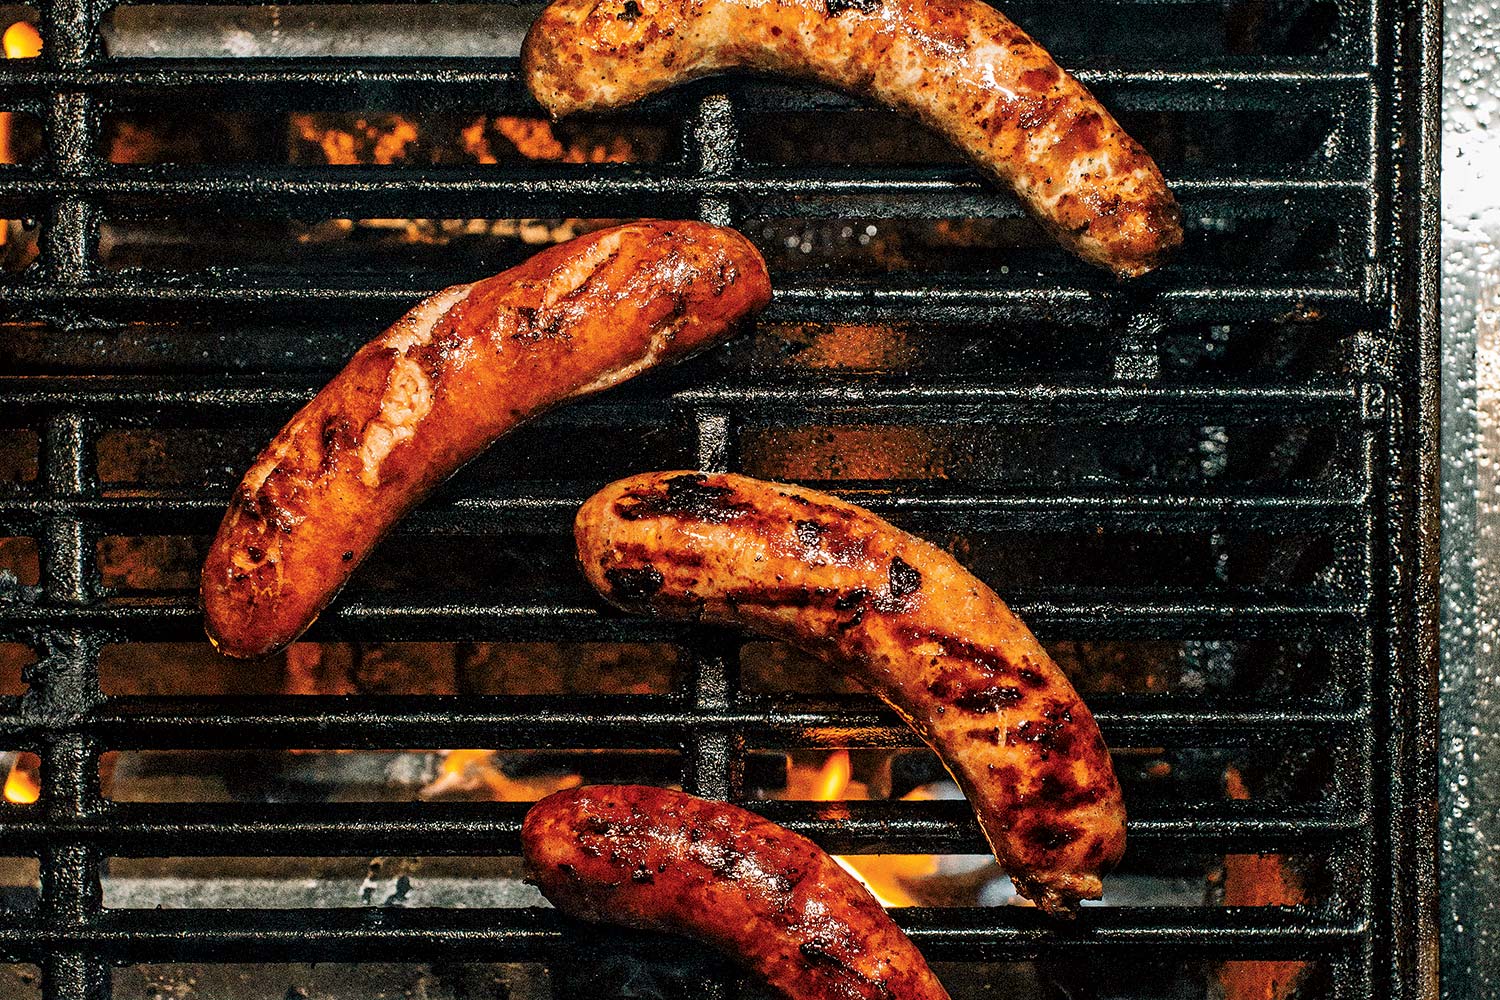 https://www.chicagomag.com/wp-content/archive/Chicago-Magazine/May-2019/The-Four-Best-Sausages-for-the-Grill/C201905-T-Four-Best-Sausages-preview.jpg